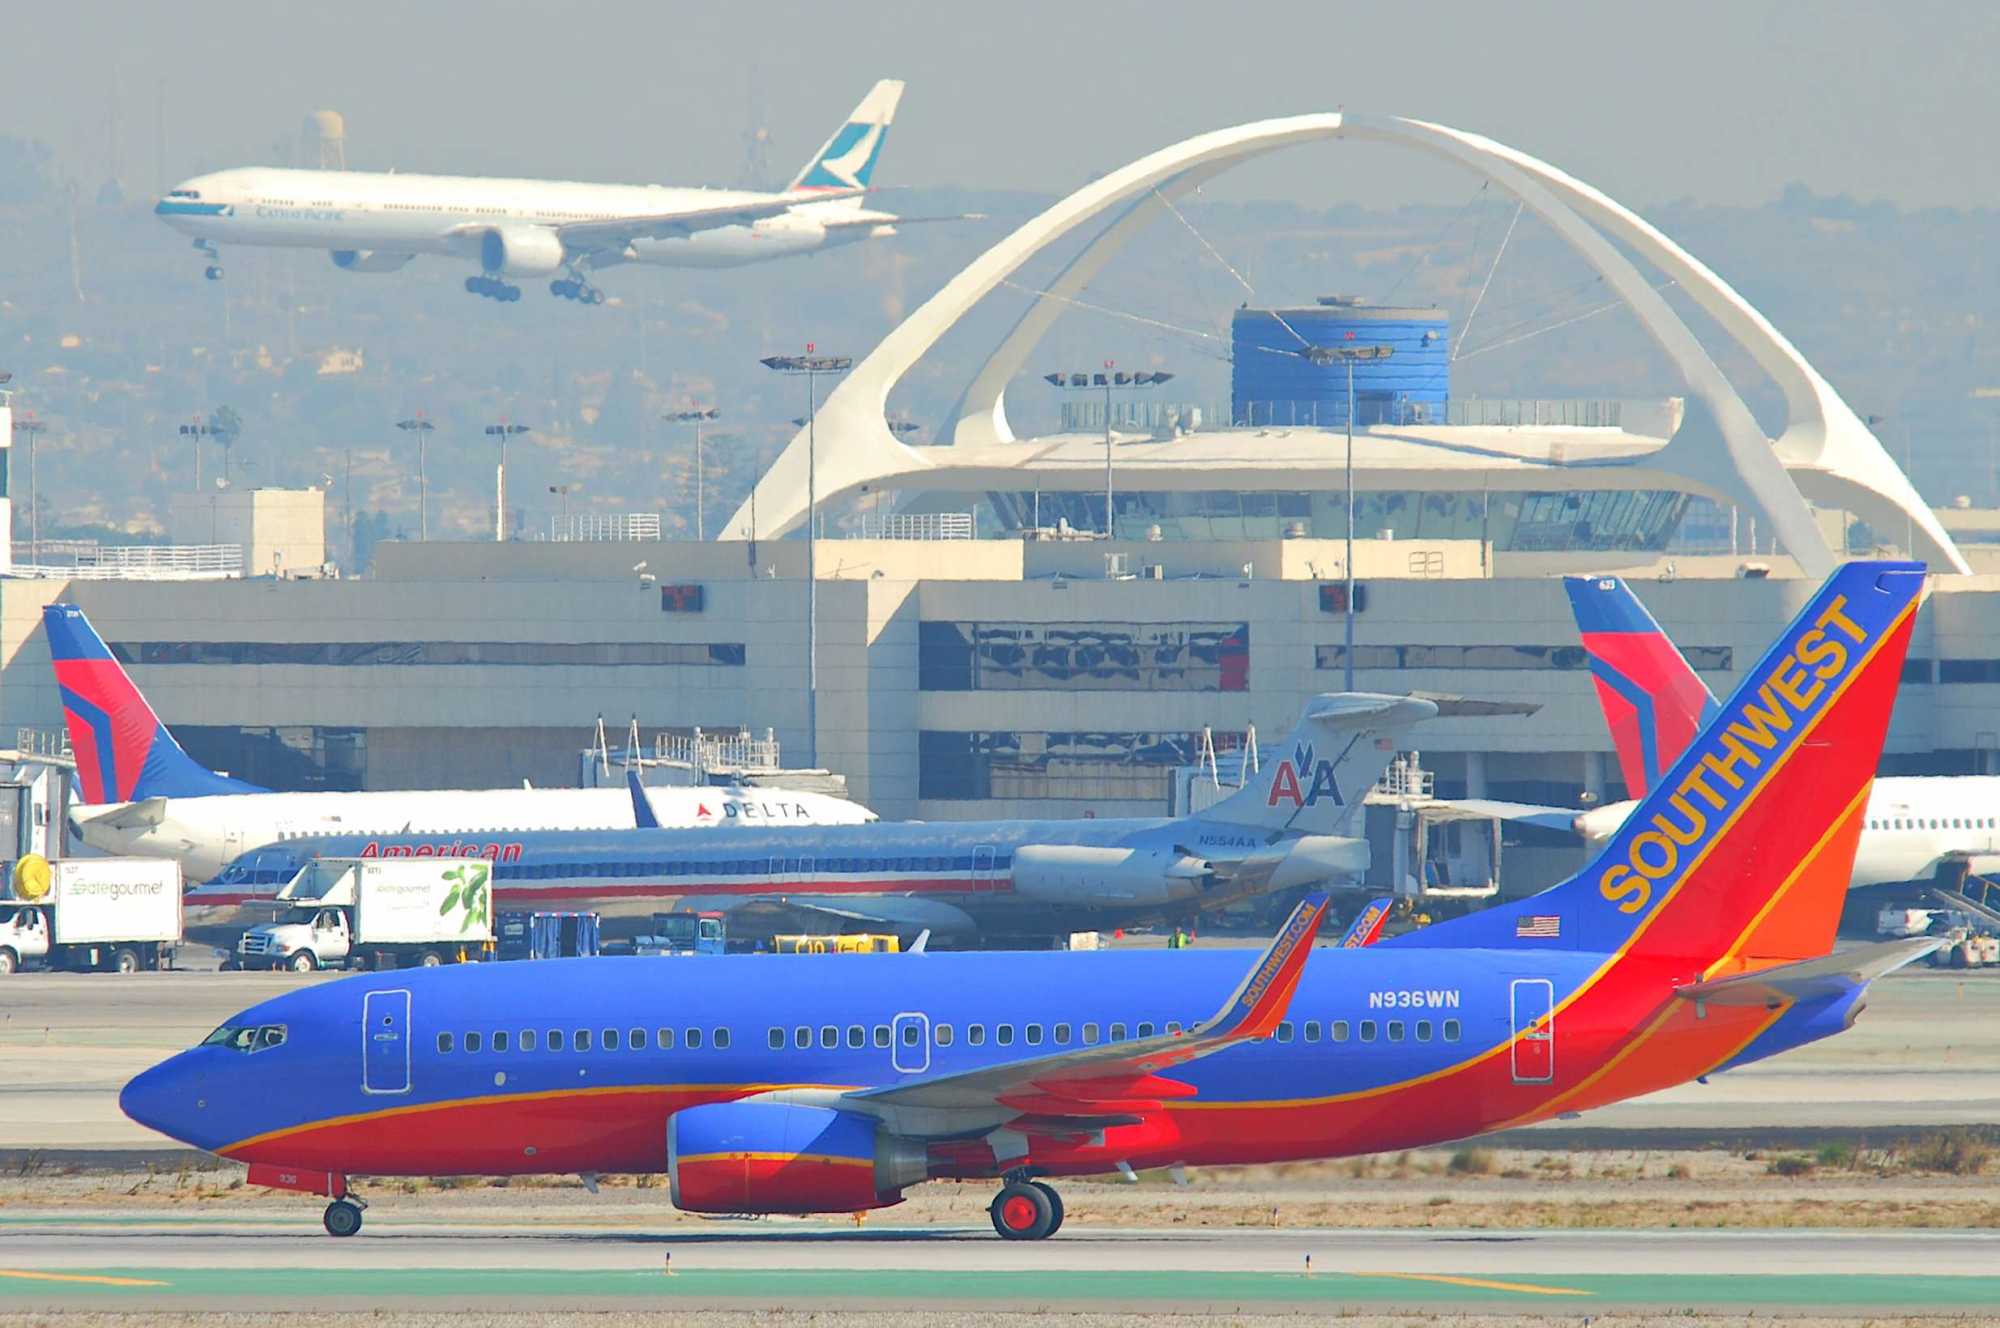 Southwest Airlines LAX